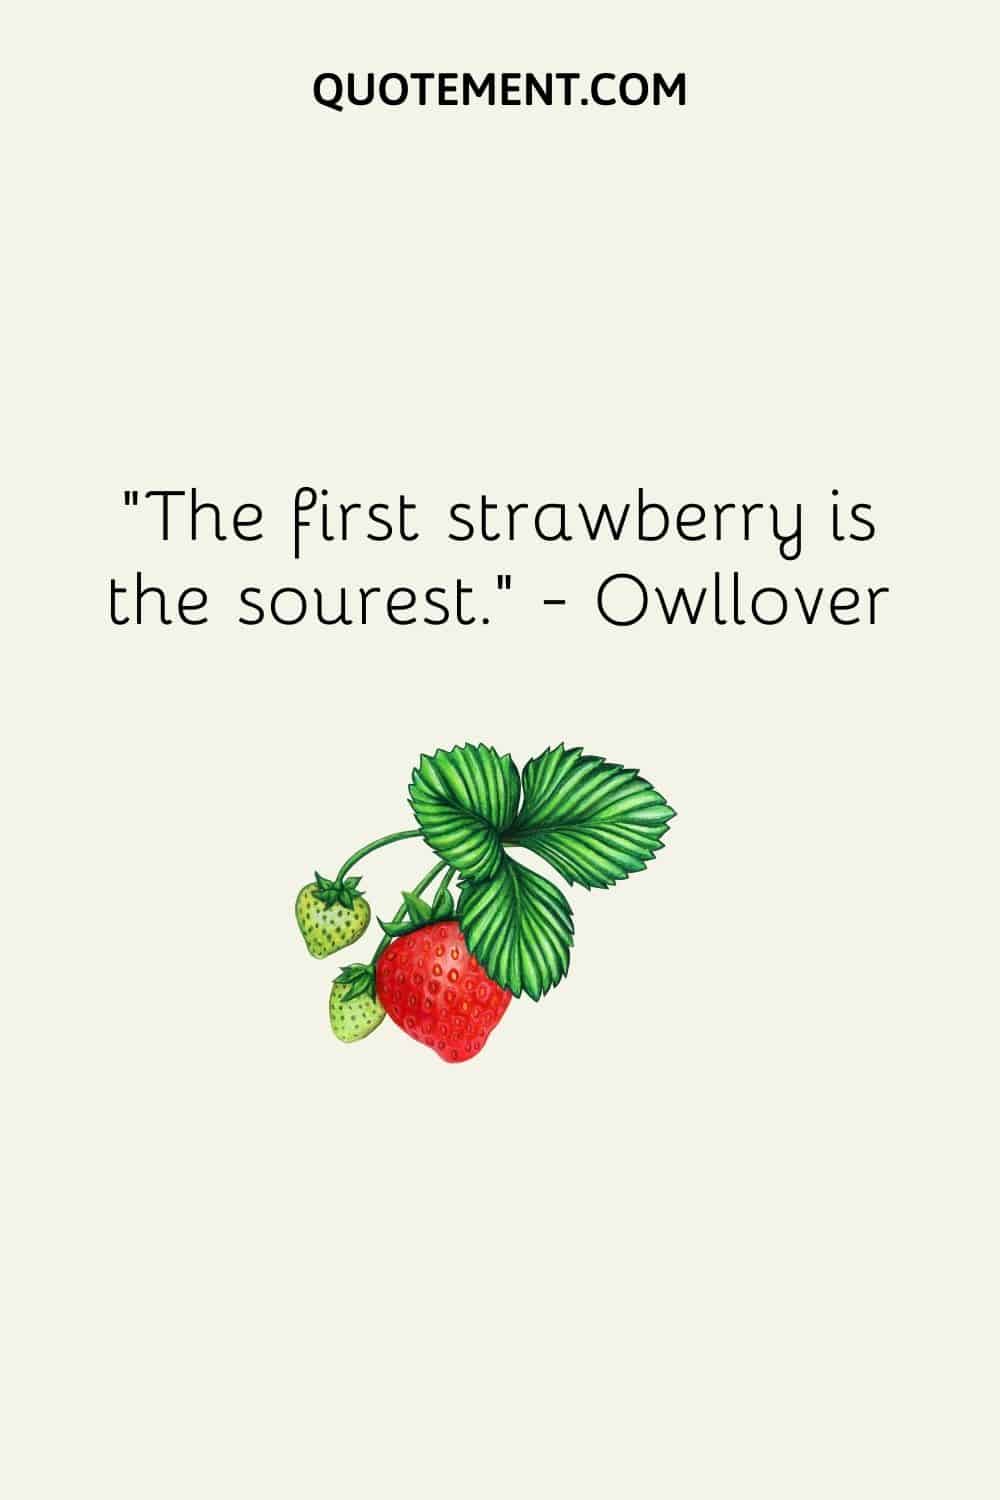 The first strawberry is the sourest